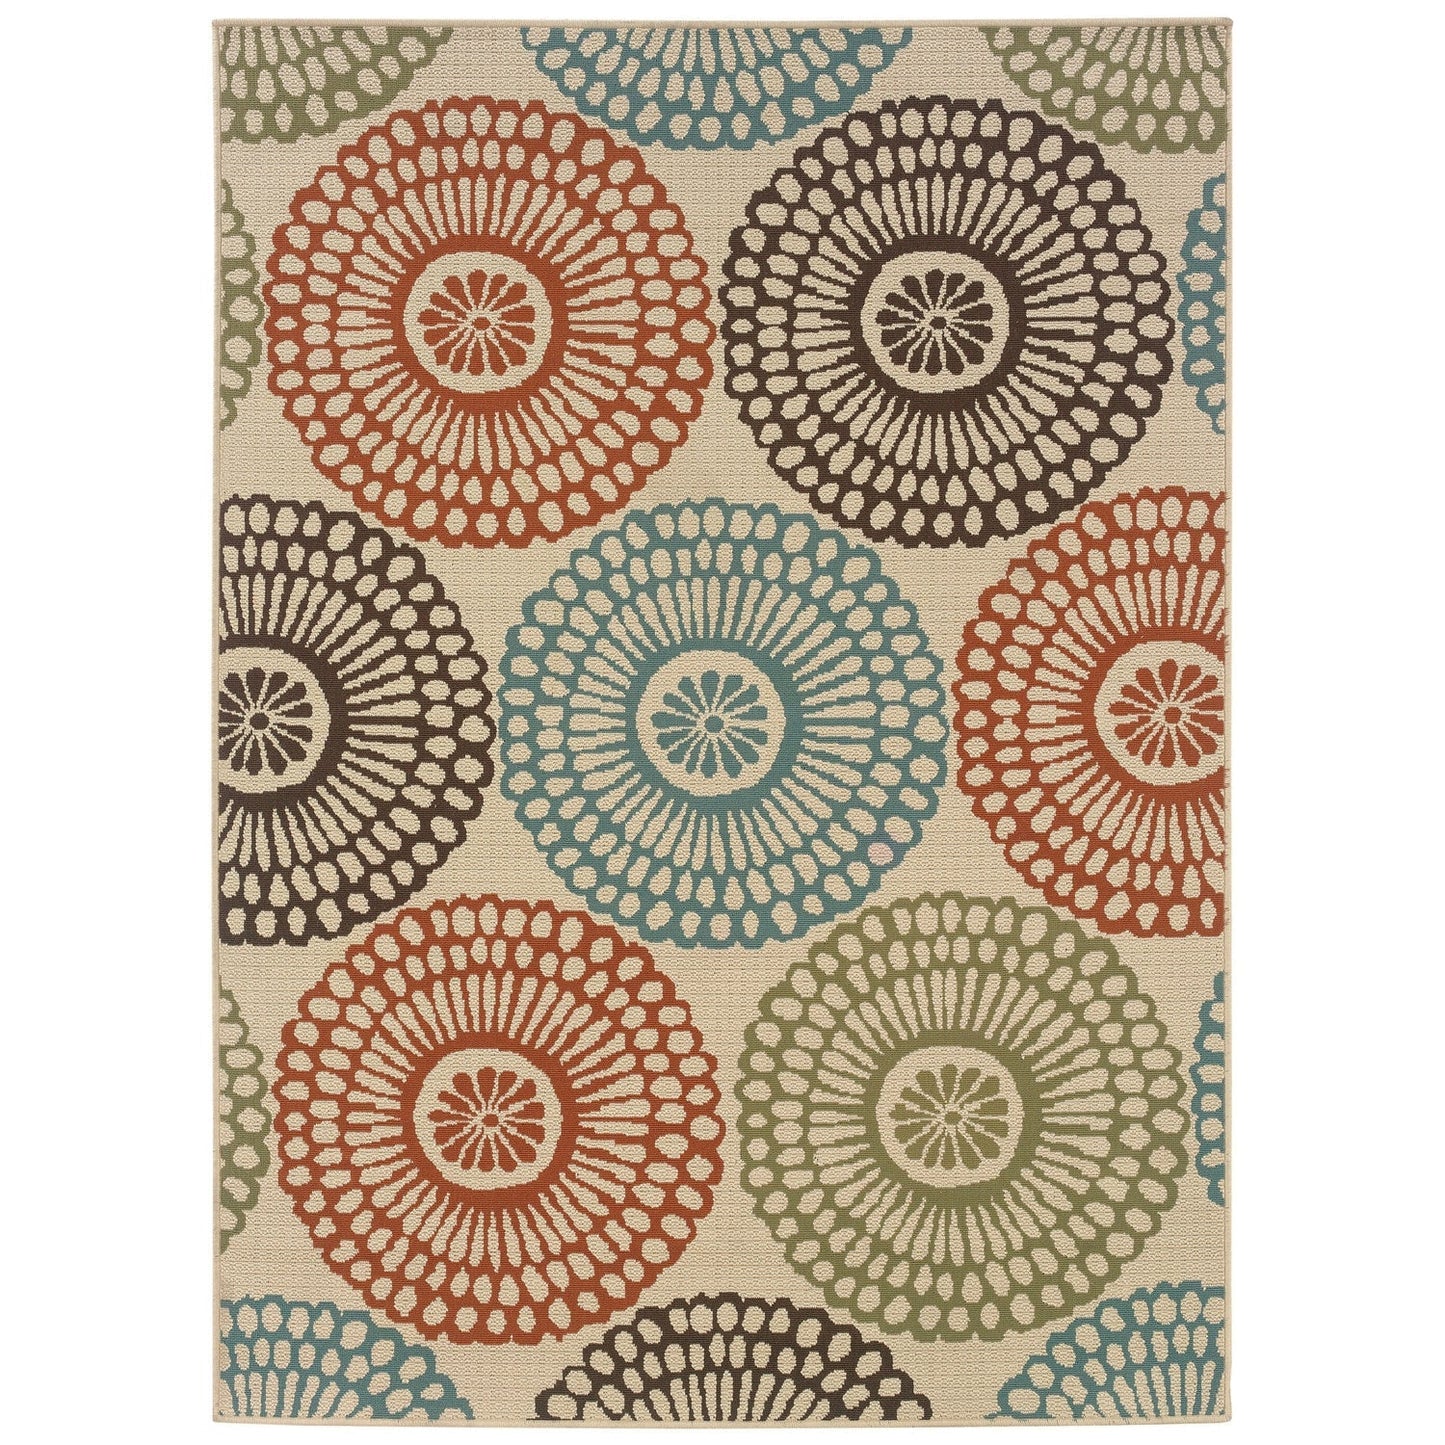 Accents > Rugs - 7'10" X 10'10" Indoor / Outdoor Beige Area Rug With Colorful Circle Pattern